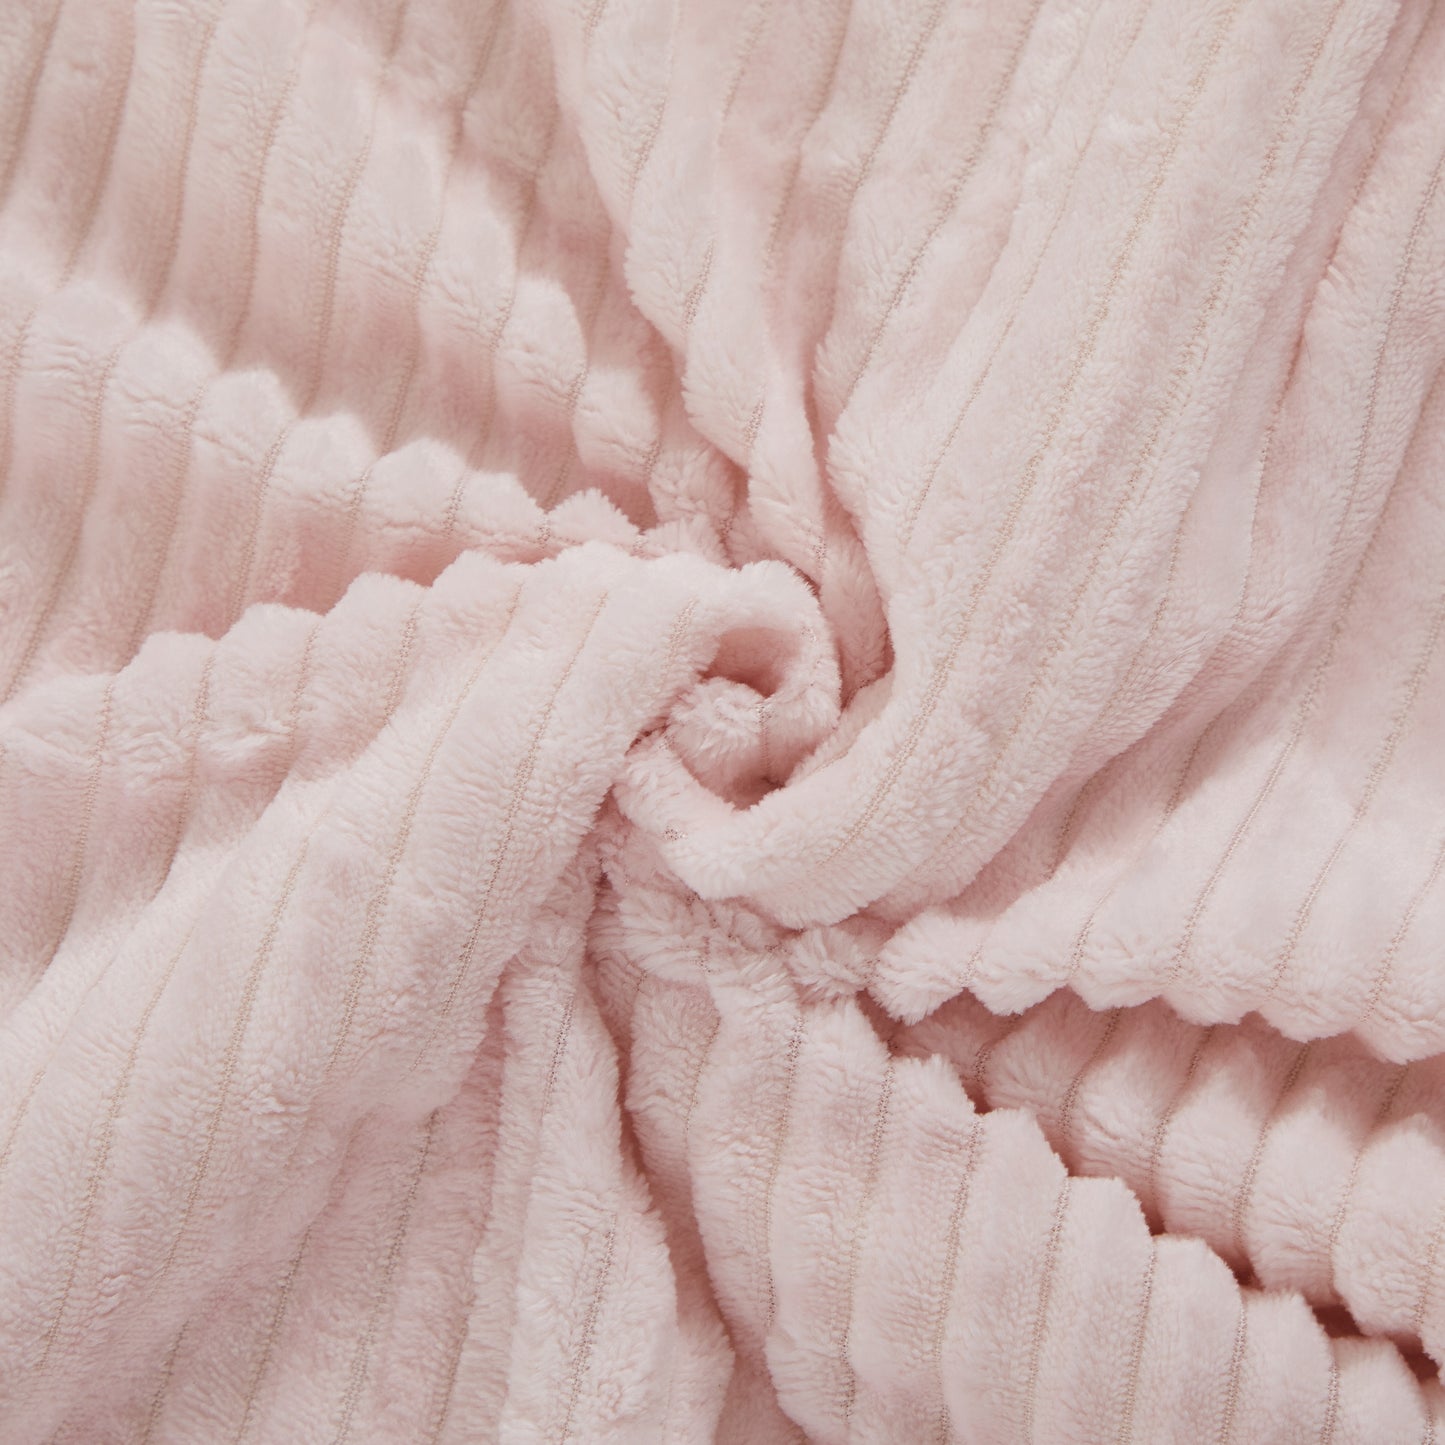 Mon Lapin by Thesis Textured Corduroy Embossed Baby Blanket - Rose